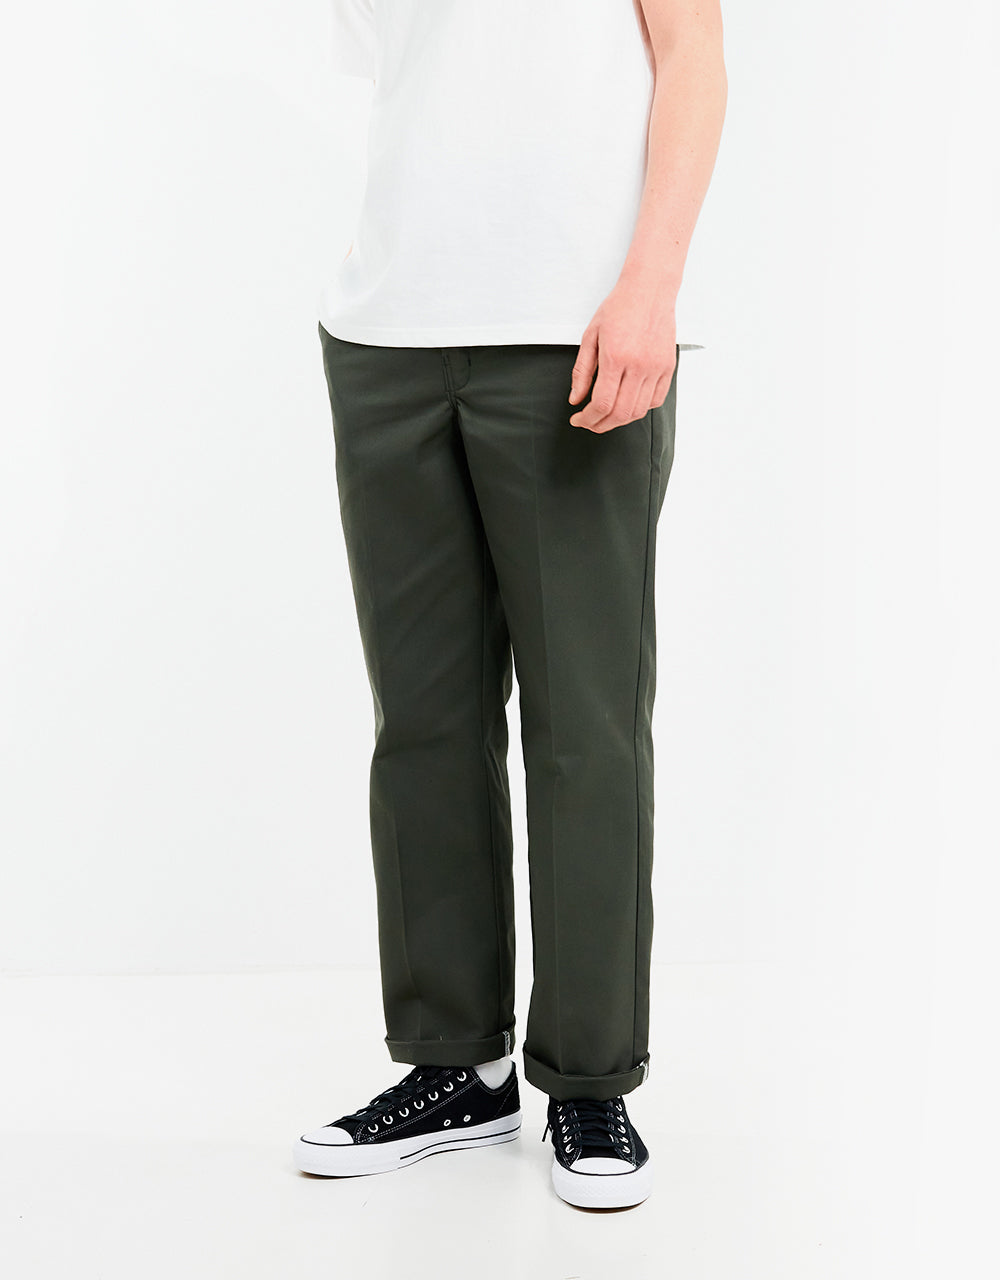 Dickies 873 Recycled Work Pant - Olive Green – Route One